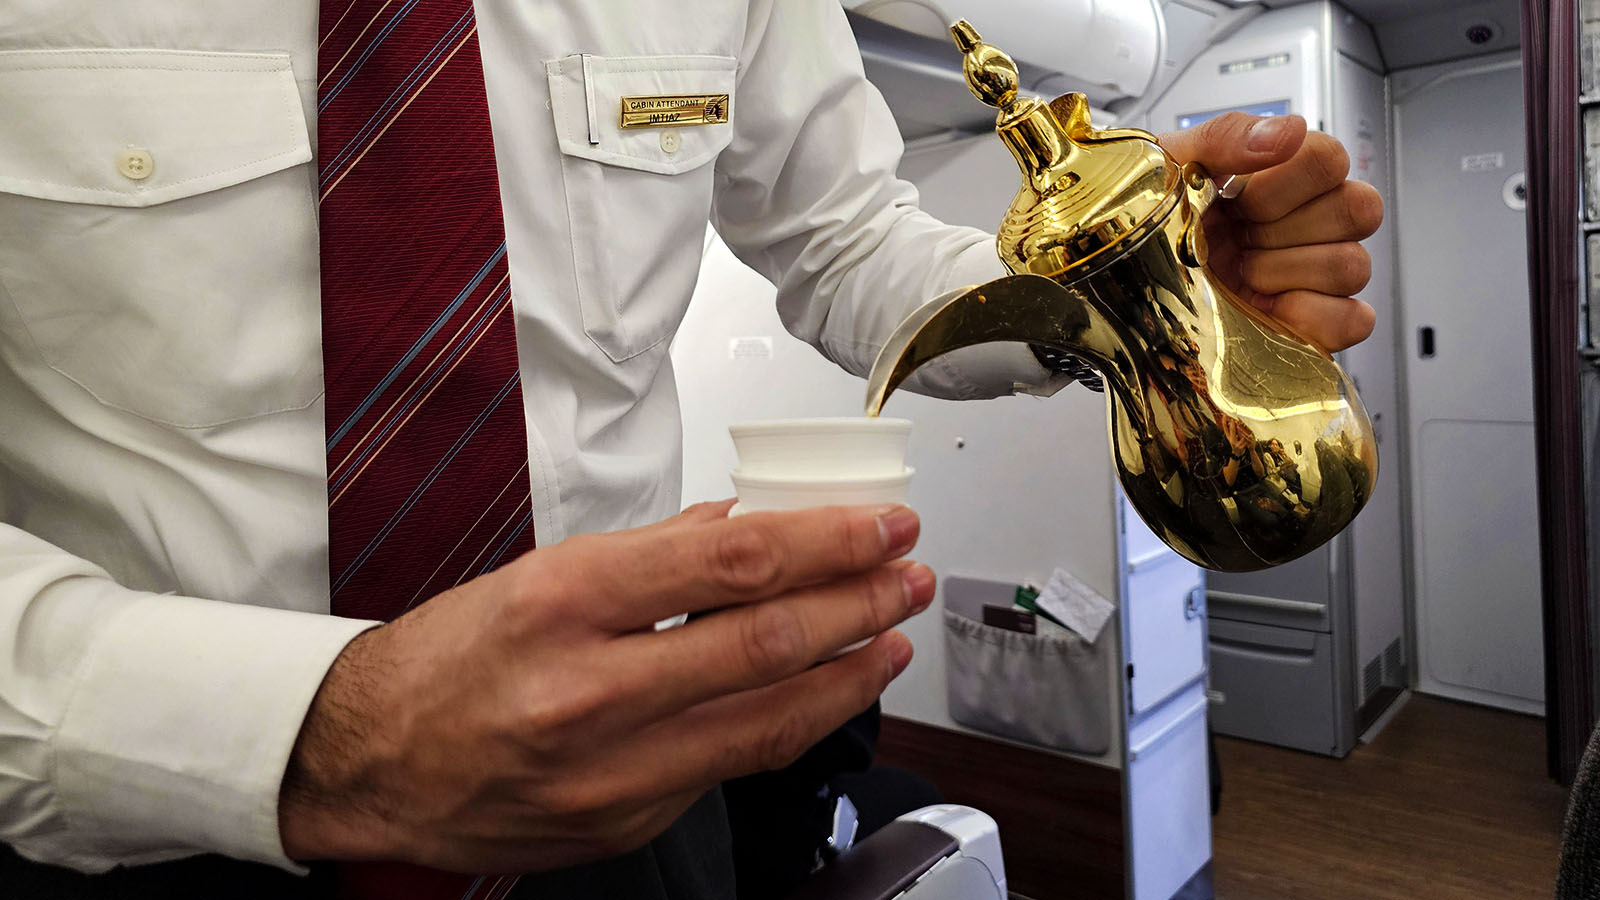 Coffee pot in First Class on Qatar Airways' Airbus A320